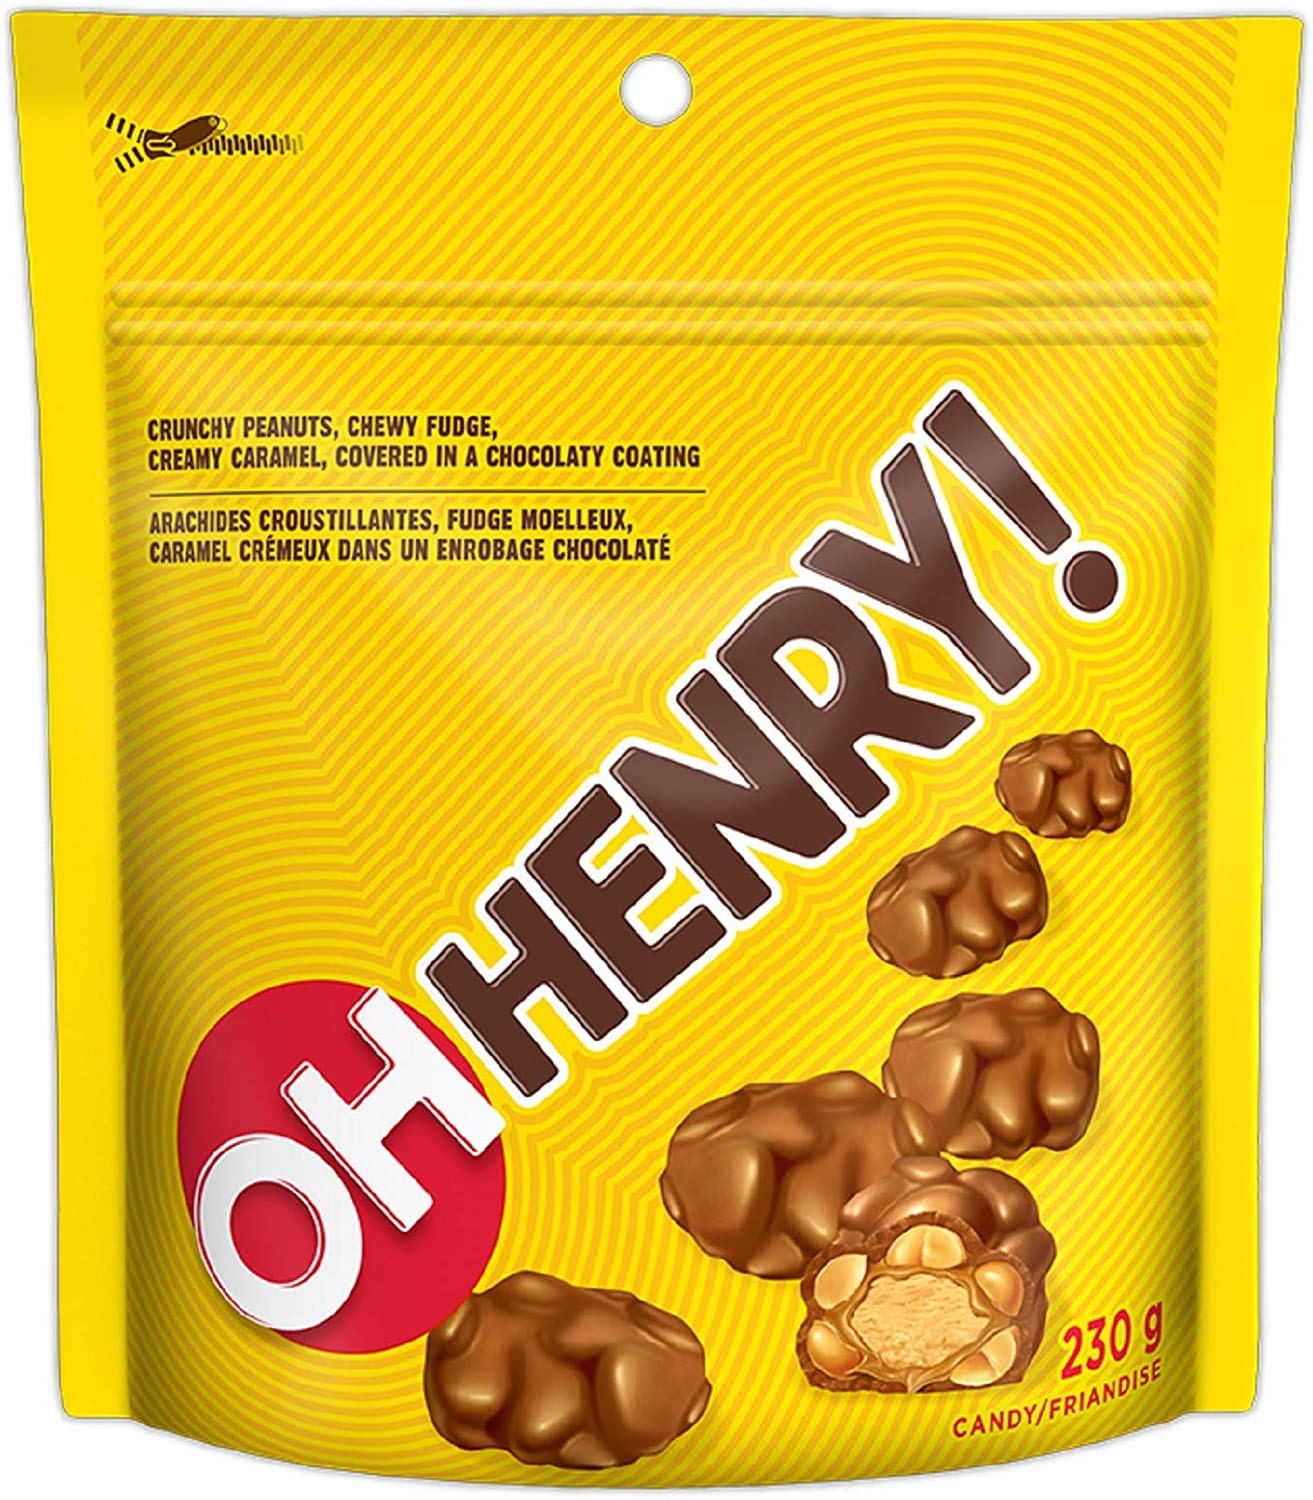 Oh Henry Lovers Variety Bundle (Pack of 5) 1.1kg/38.9oz (Shipped from Canada)